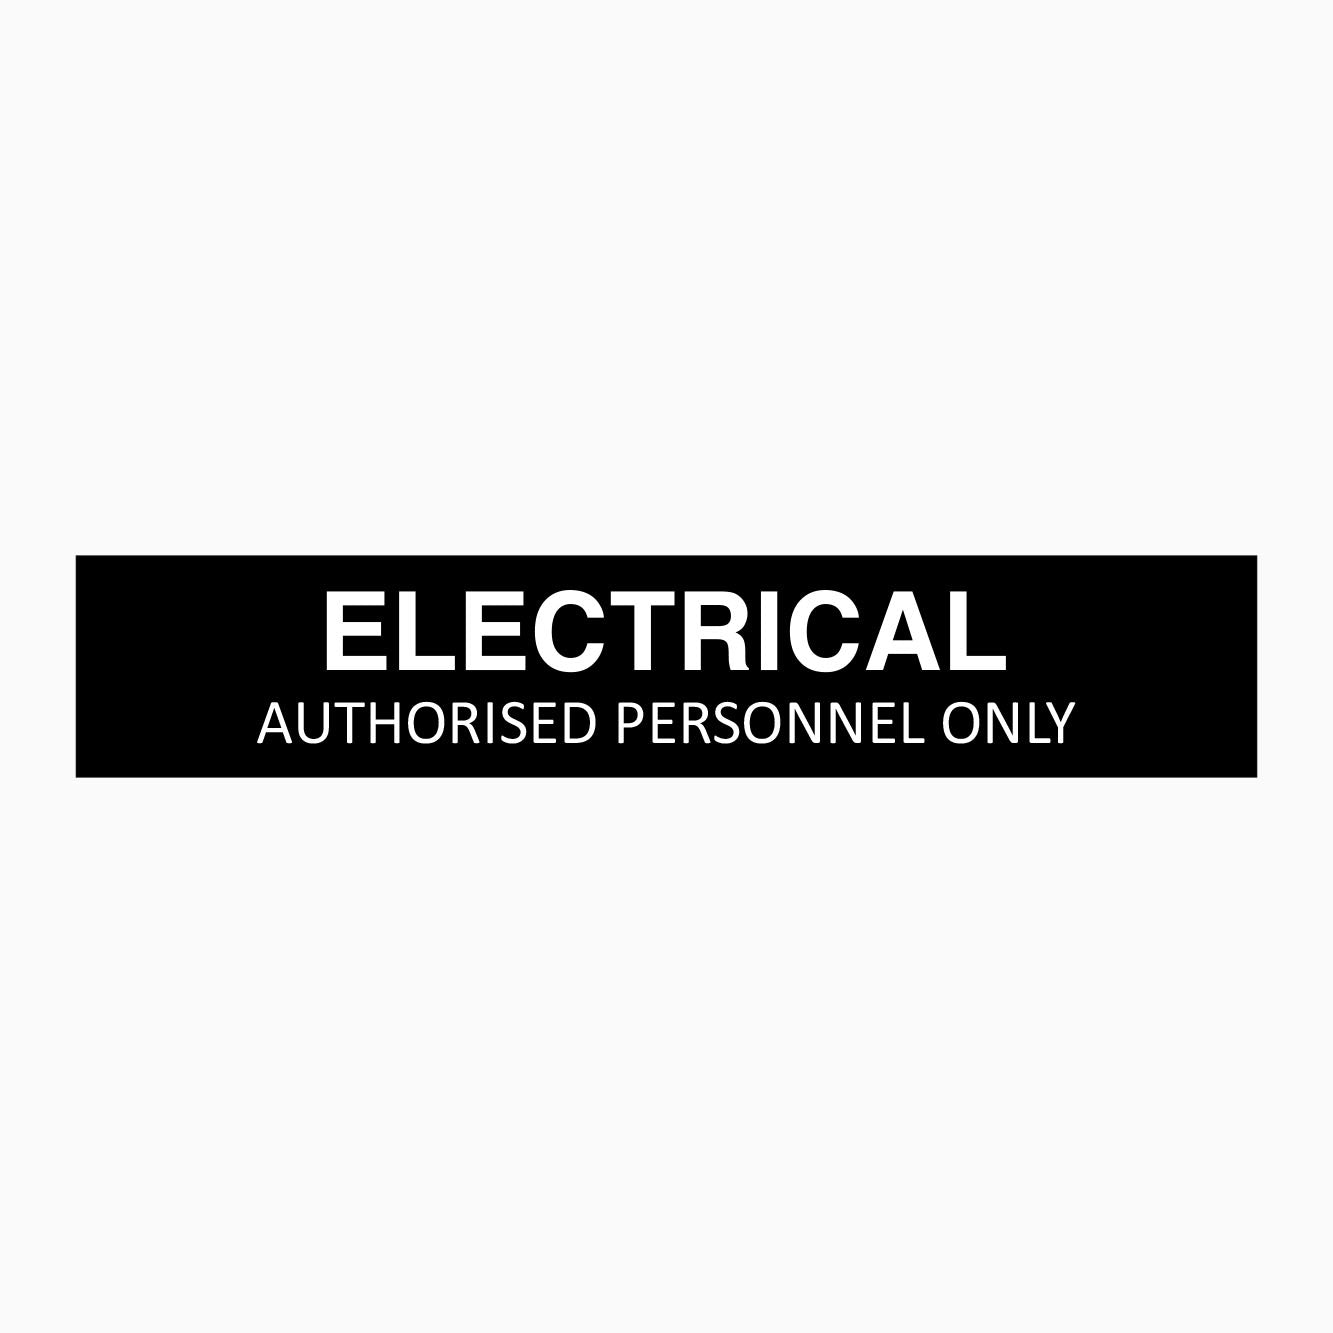 ELECTRICAL SIGN  - AUTHORISED PERSONNEL ONLY SIGN - GET SIGNS